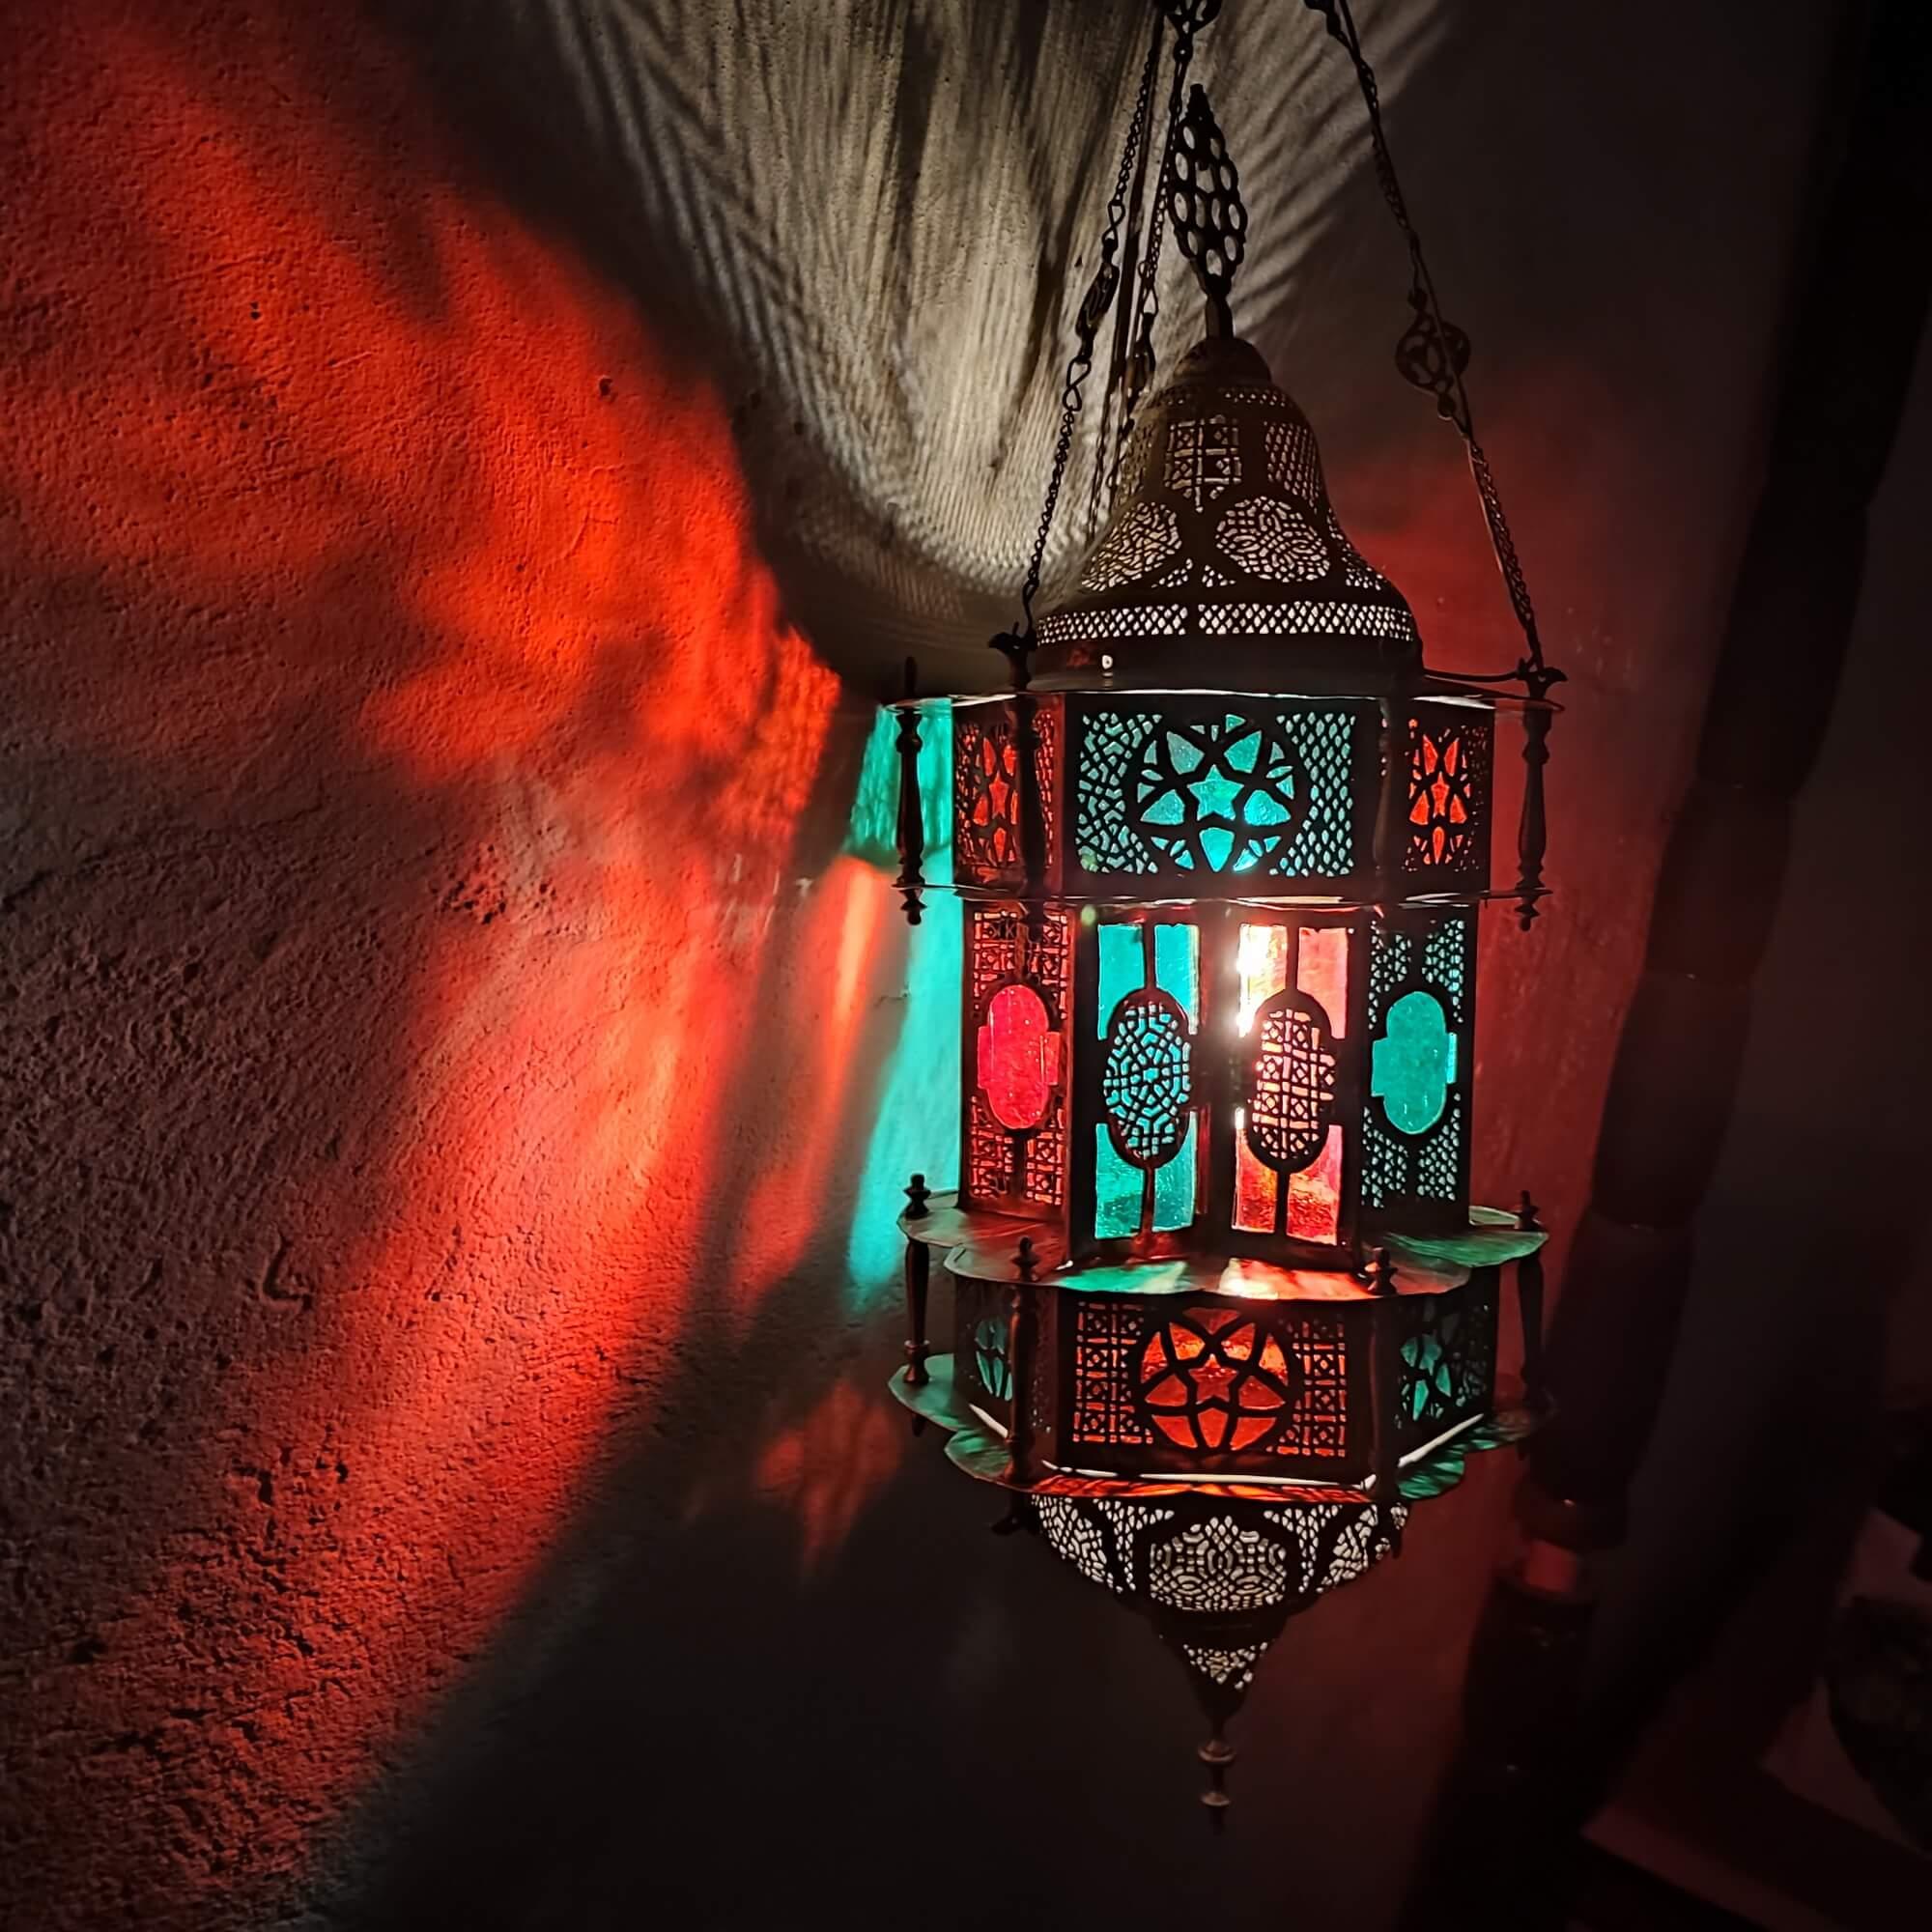 moroccan style hanging lamps